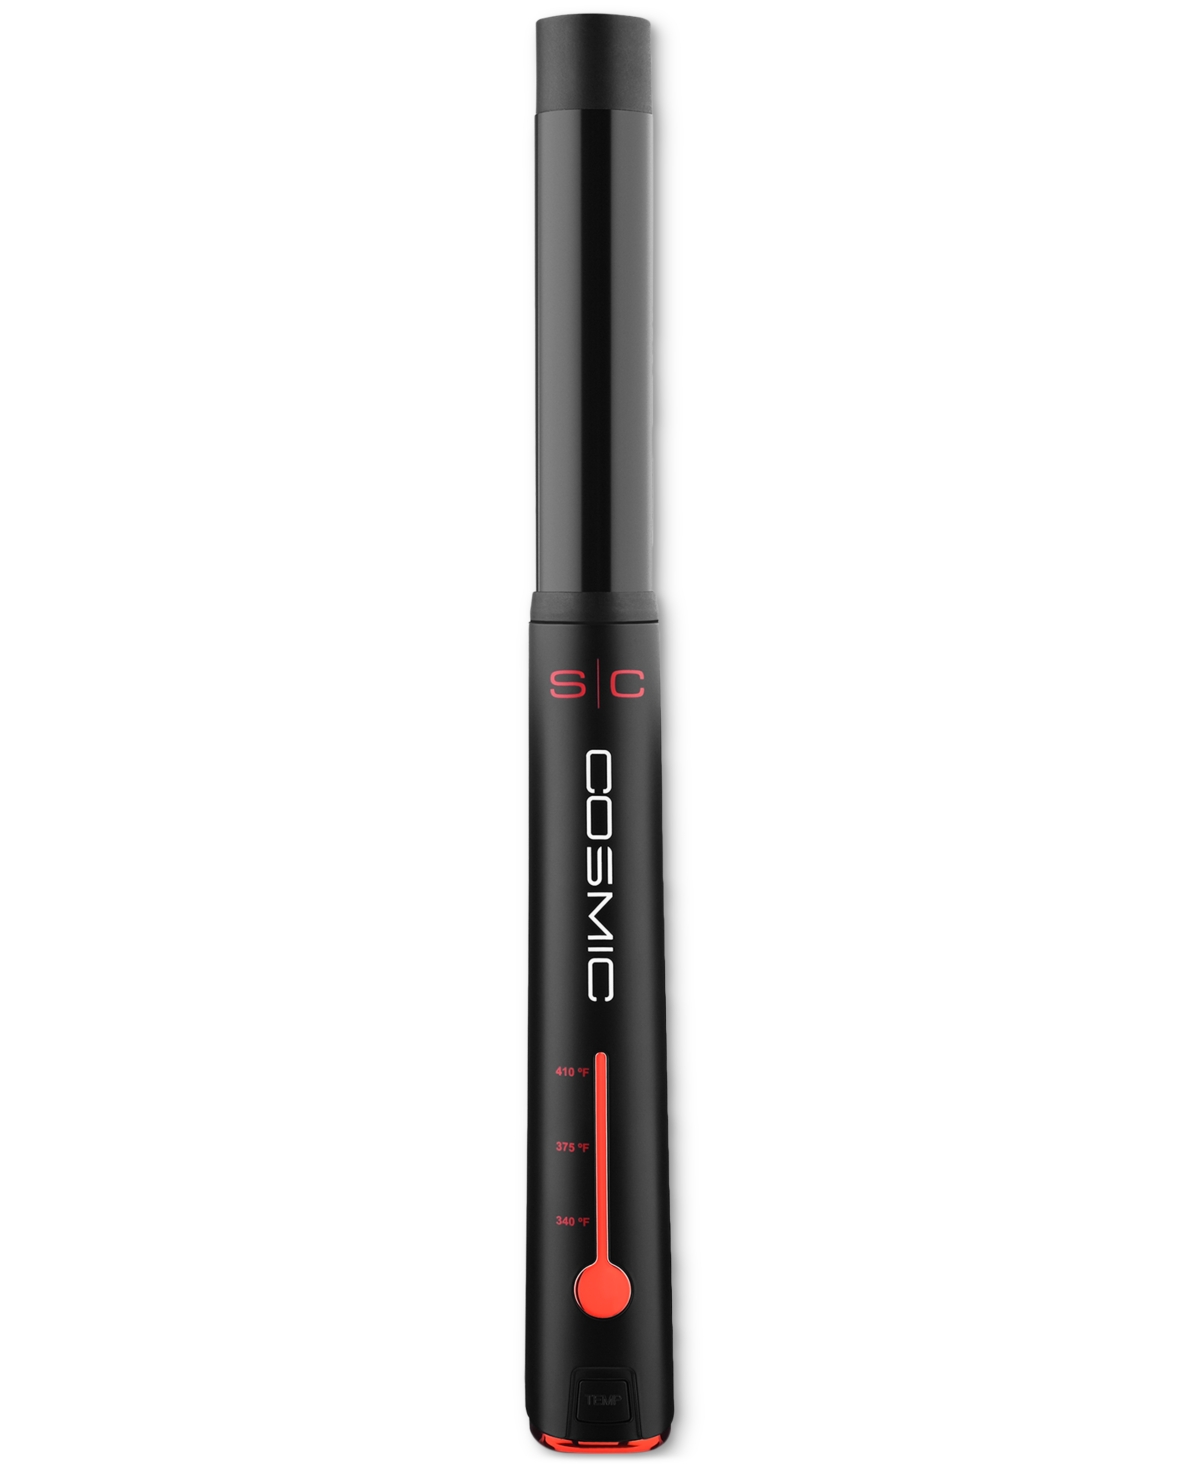 1" Cosmic Cordless Curling Wand